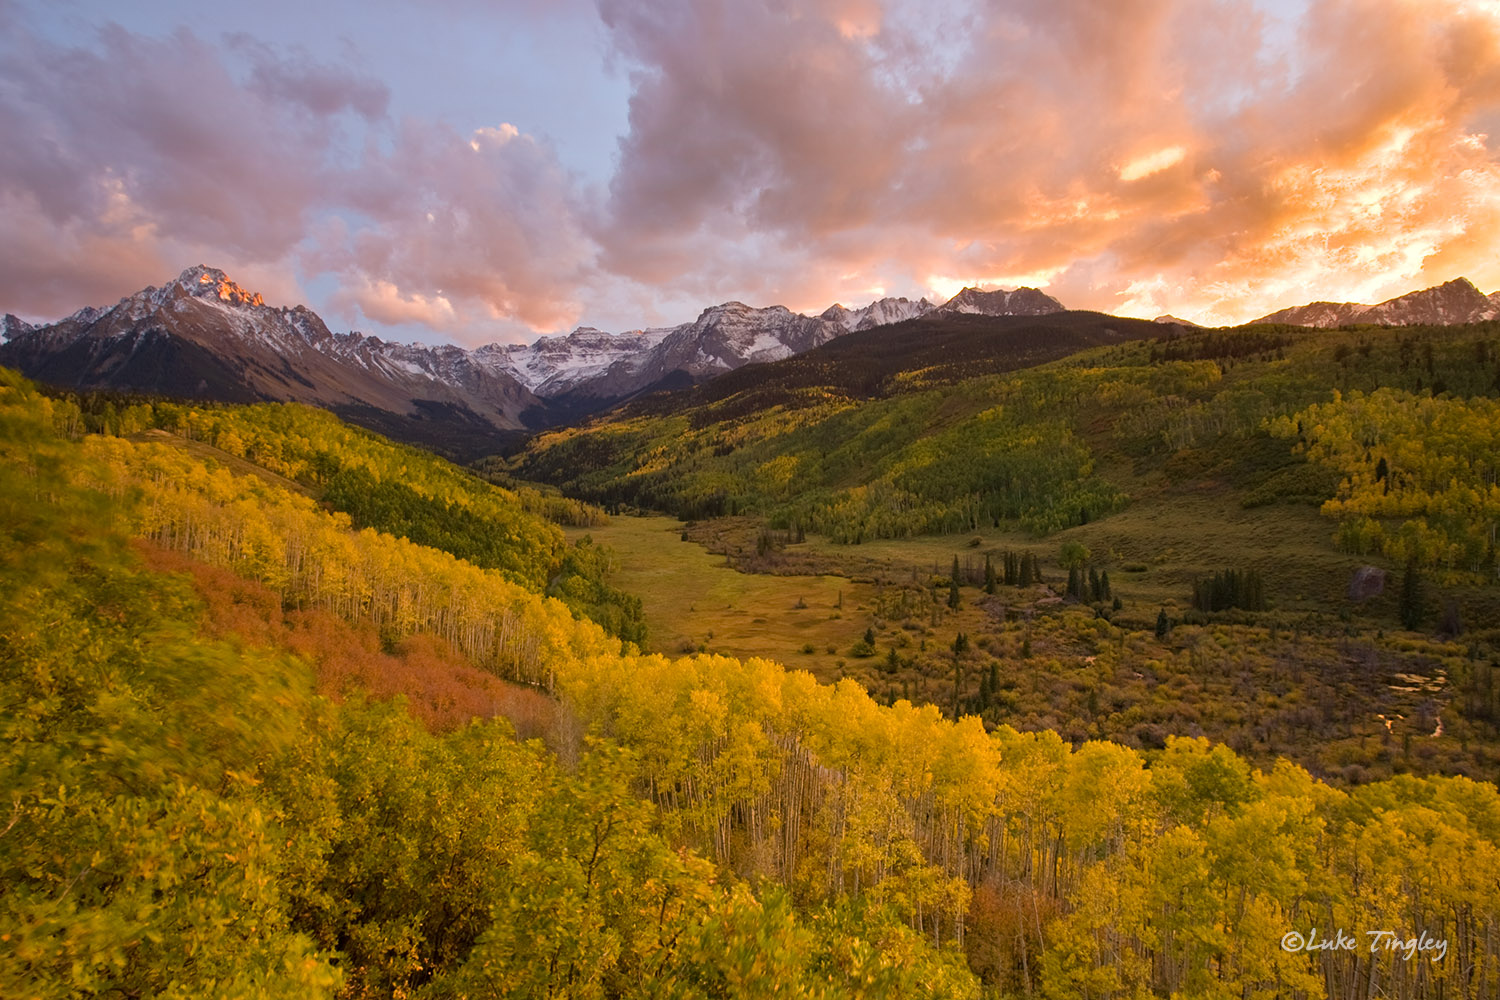 Ouray, Colorado, Mt. Sneffels, wilderness, sunset, clouds, fall, aspens, yellow, snow, meadows, united states, mountains, 14ers...